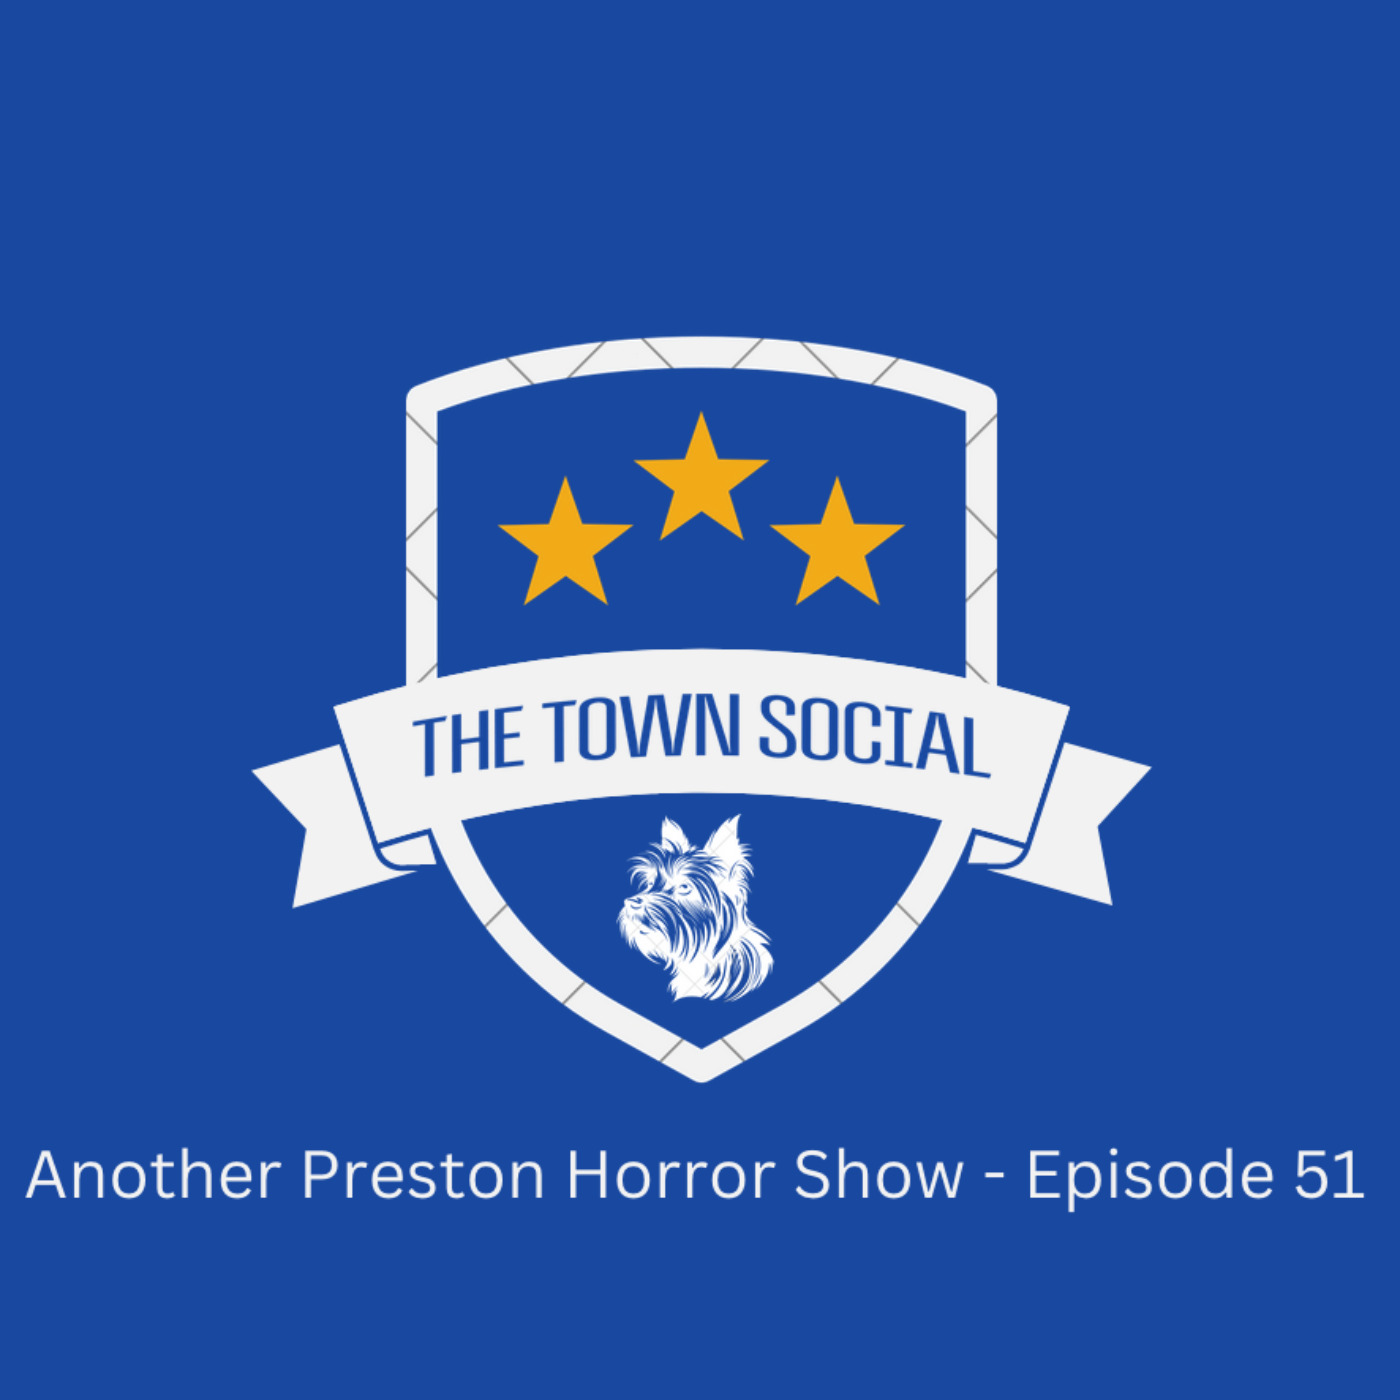 Another Preston Horror Show - The Huddersfield Town Social - Episode 51